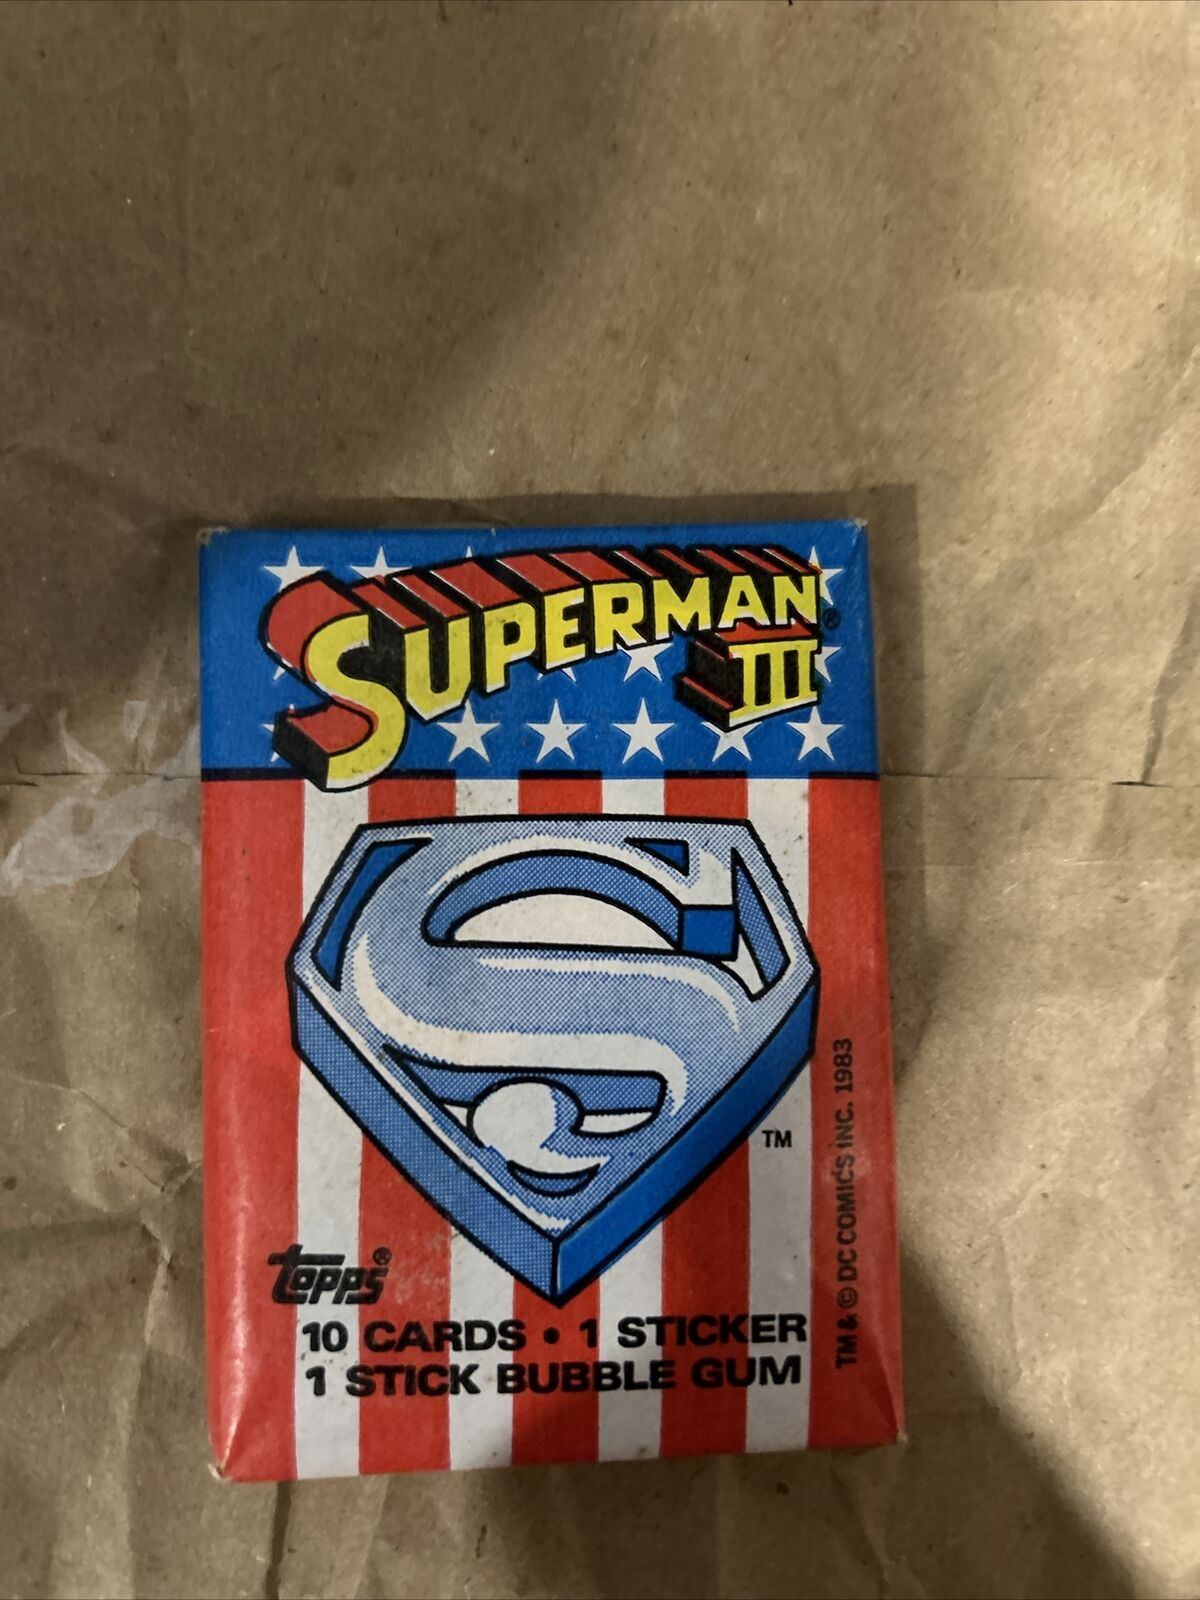 1983 TOPPS SUPERMAN III - Sealed Wax Pack (DC Comics) 10 Trading Cards 1 Sticker